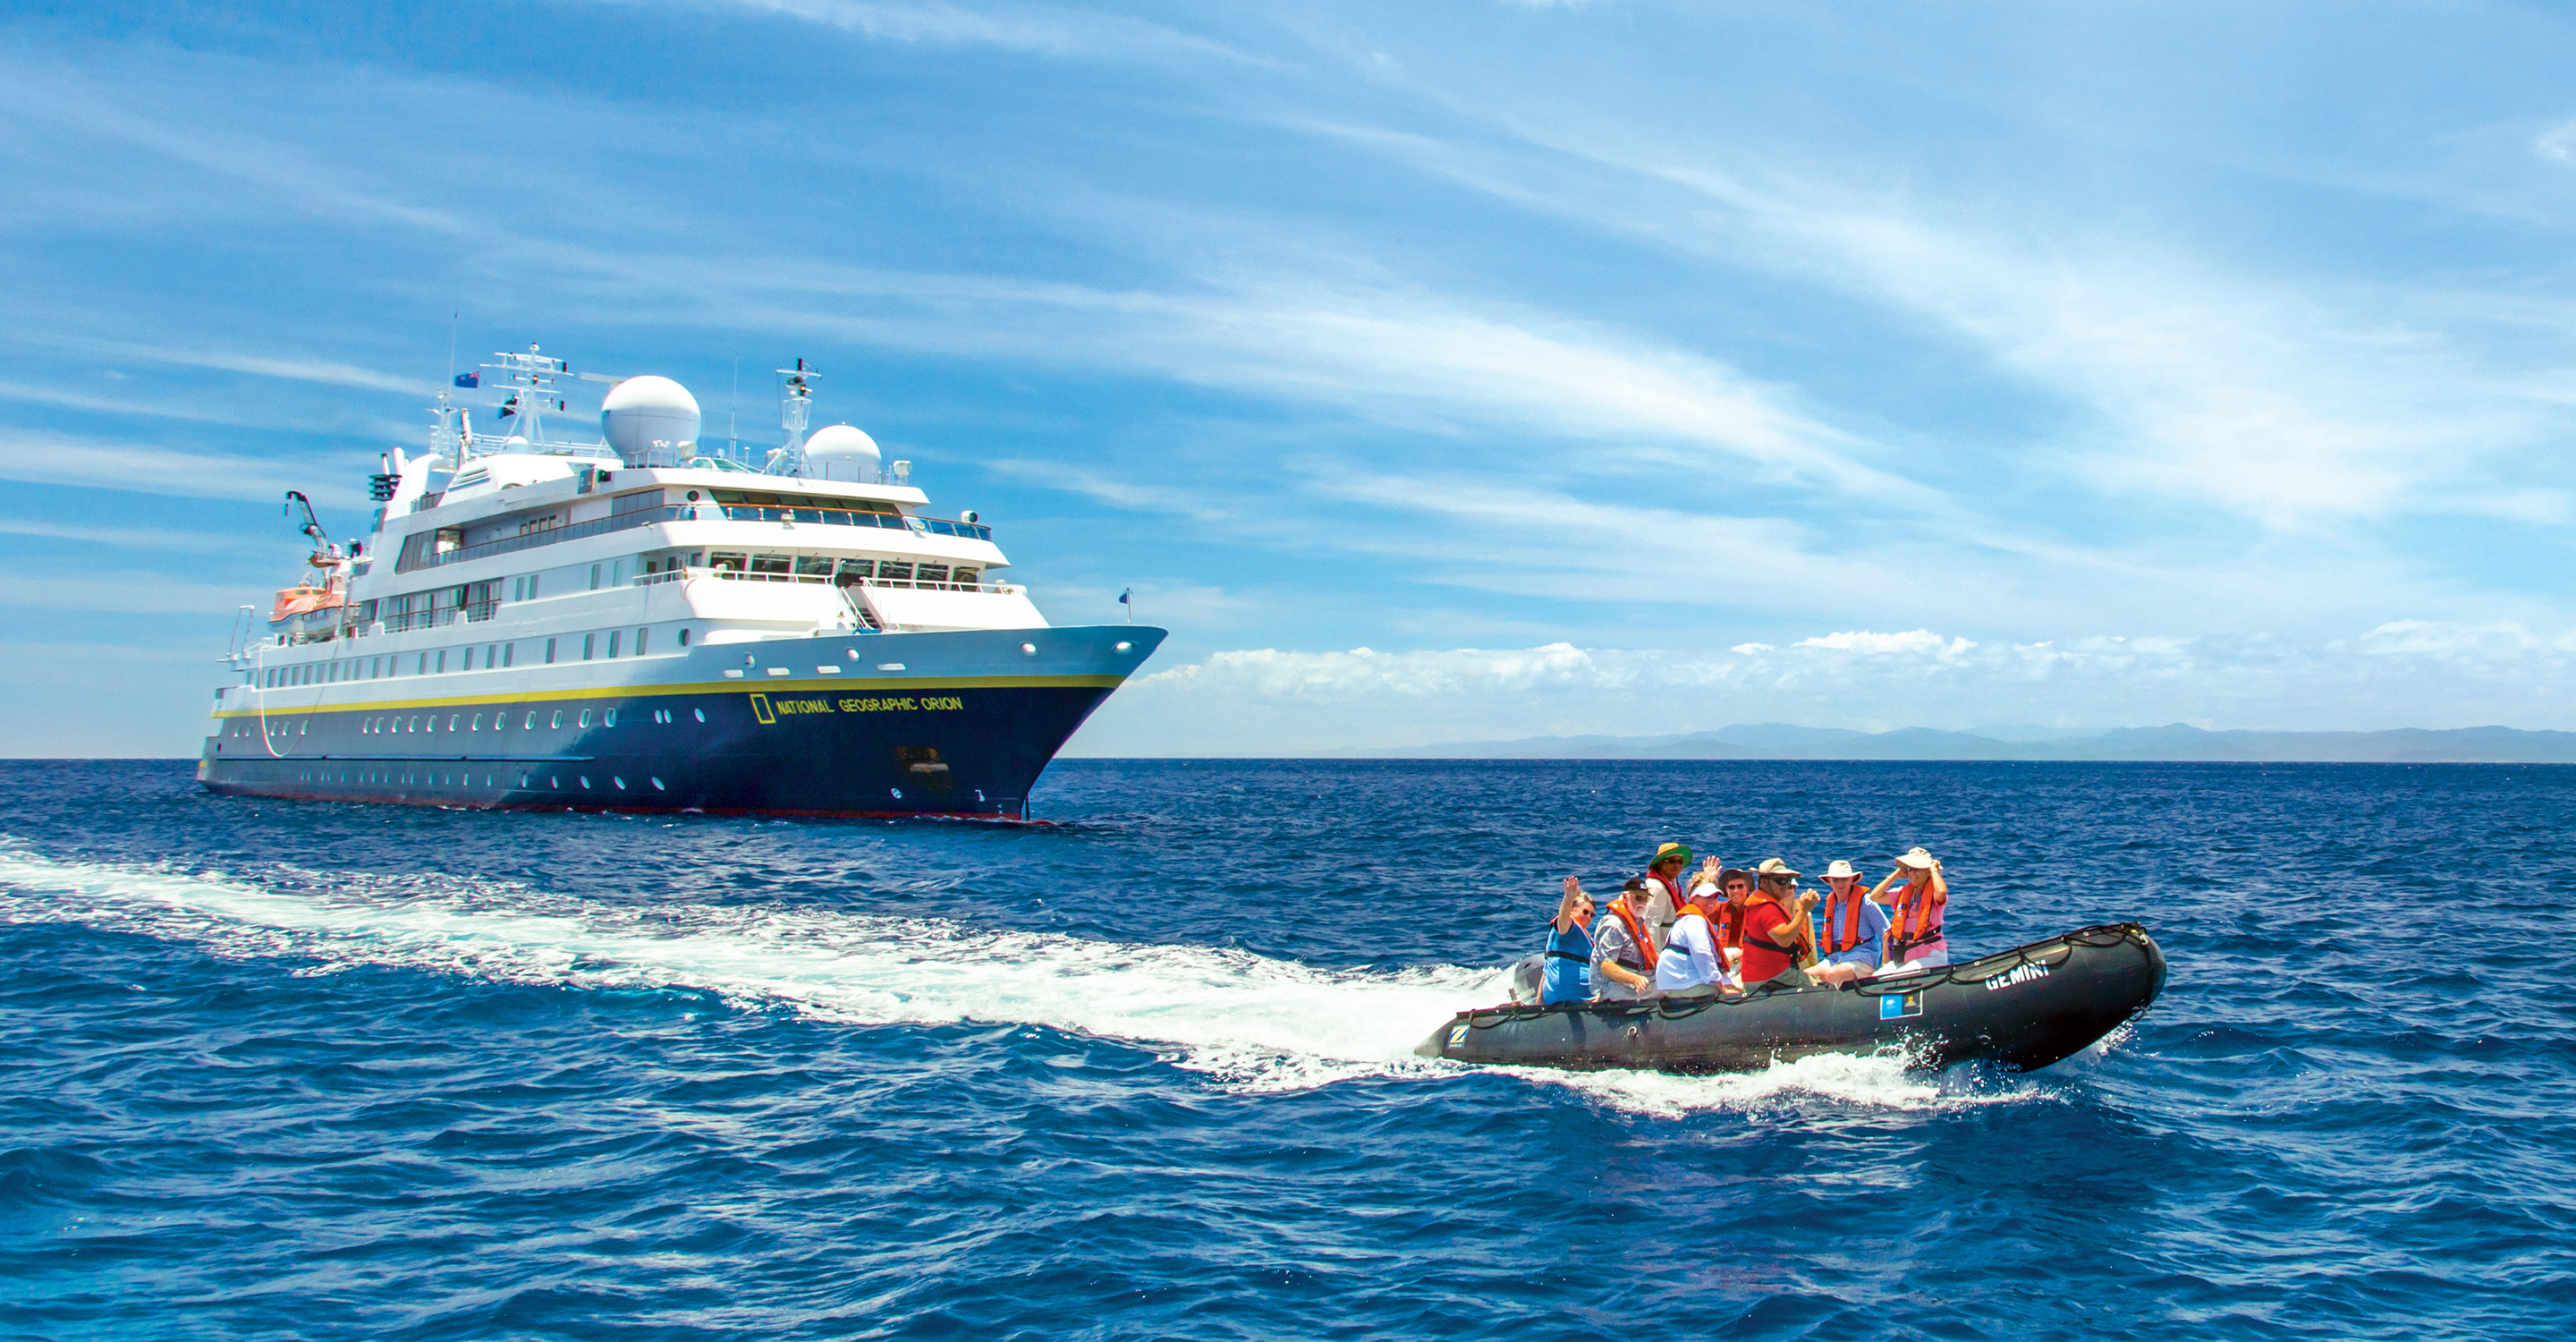 Travelers ride in a zodiac near the National Geographic Orion, South Pacific